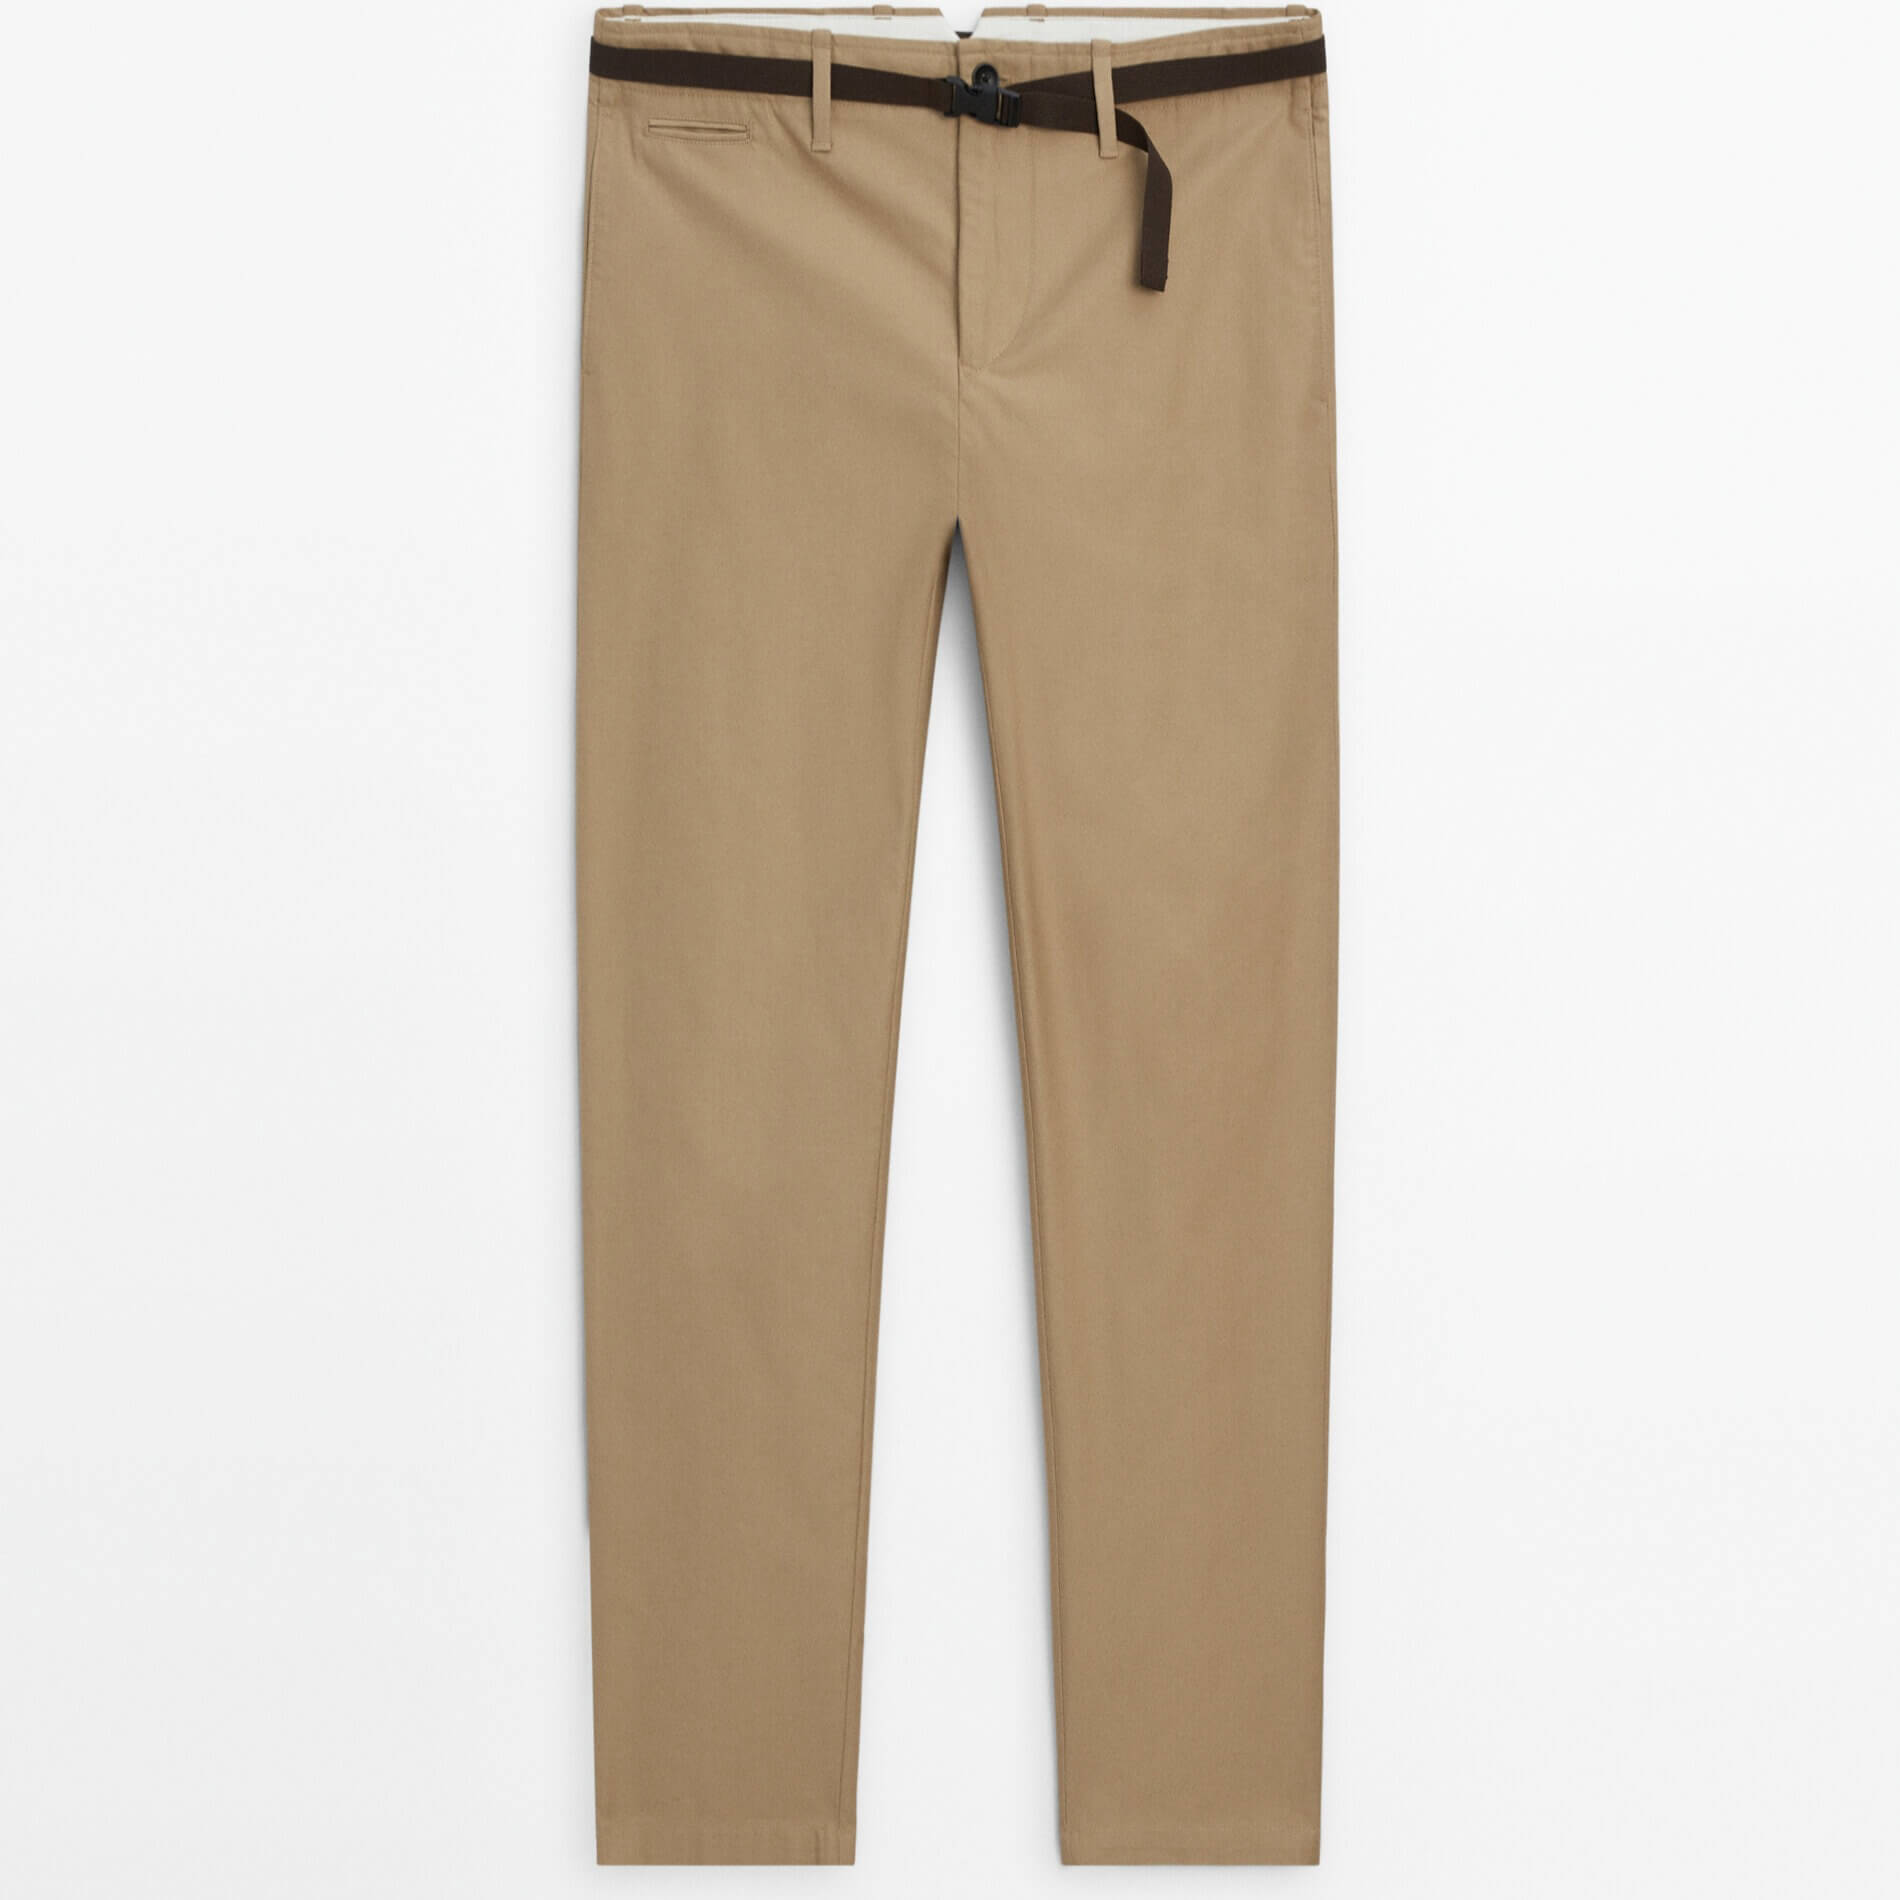 Брюки Massimo Dutti Relaxed Fit Belted Chino, бежевый брюки чинос massimo dutti relaxed fit wool limited edition зелёный